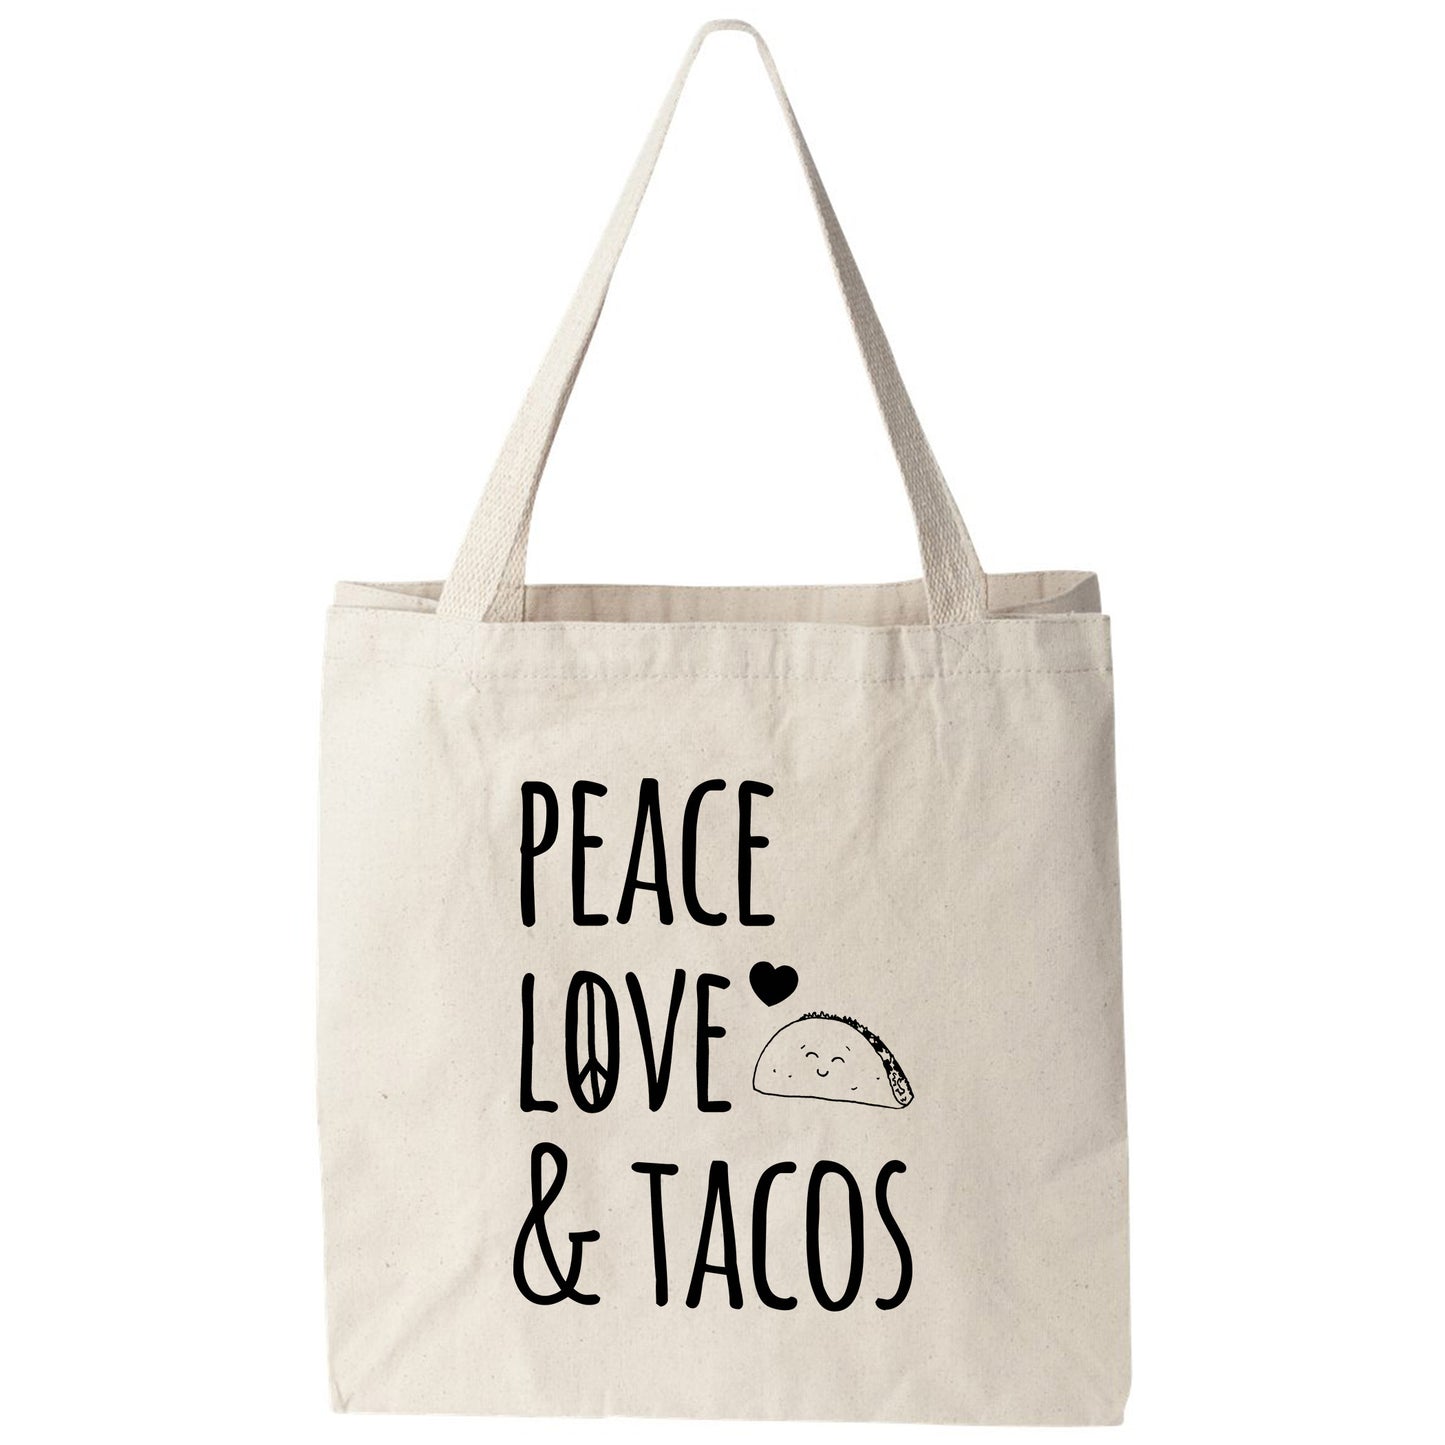 a tote bag that says peace love and tacos